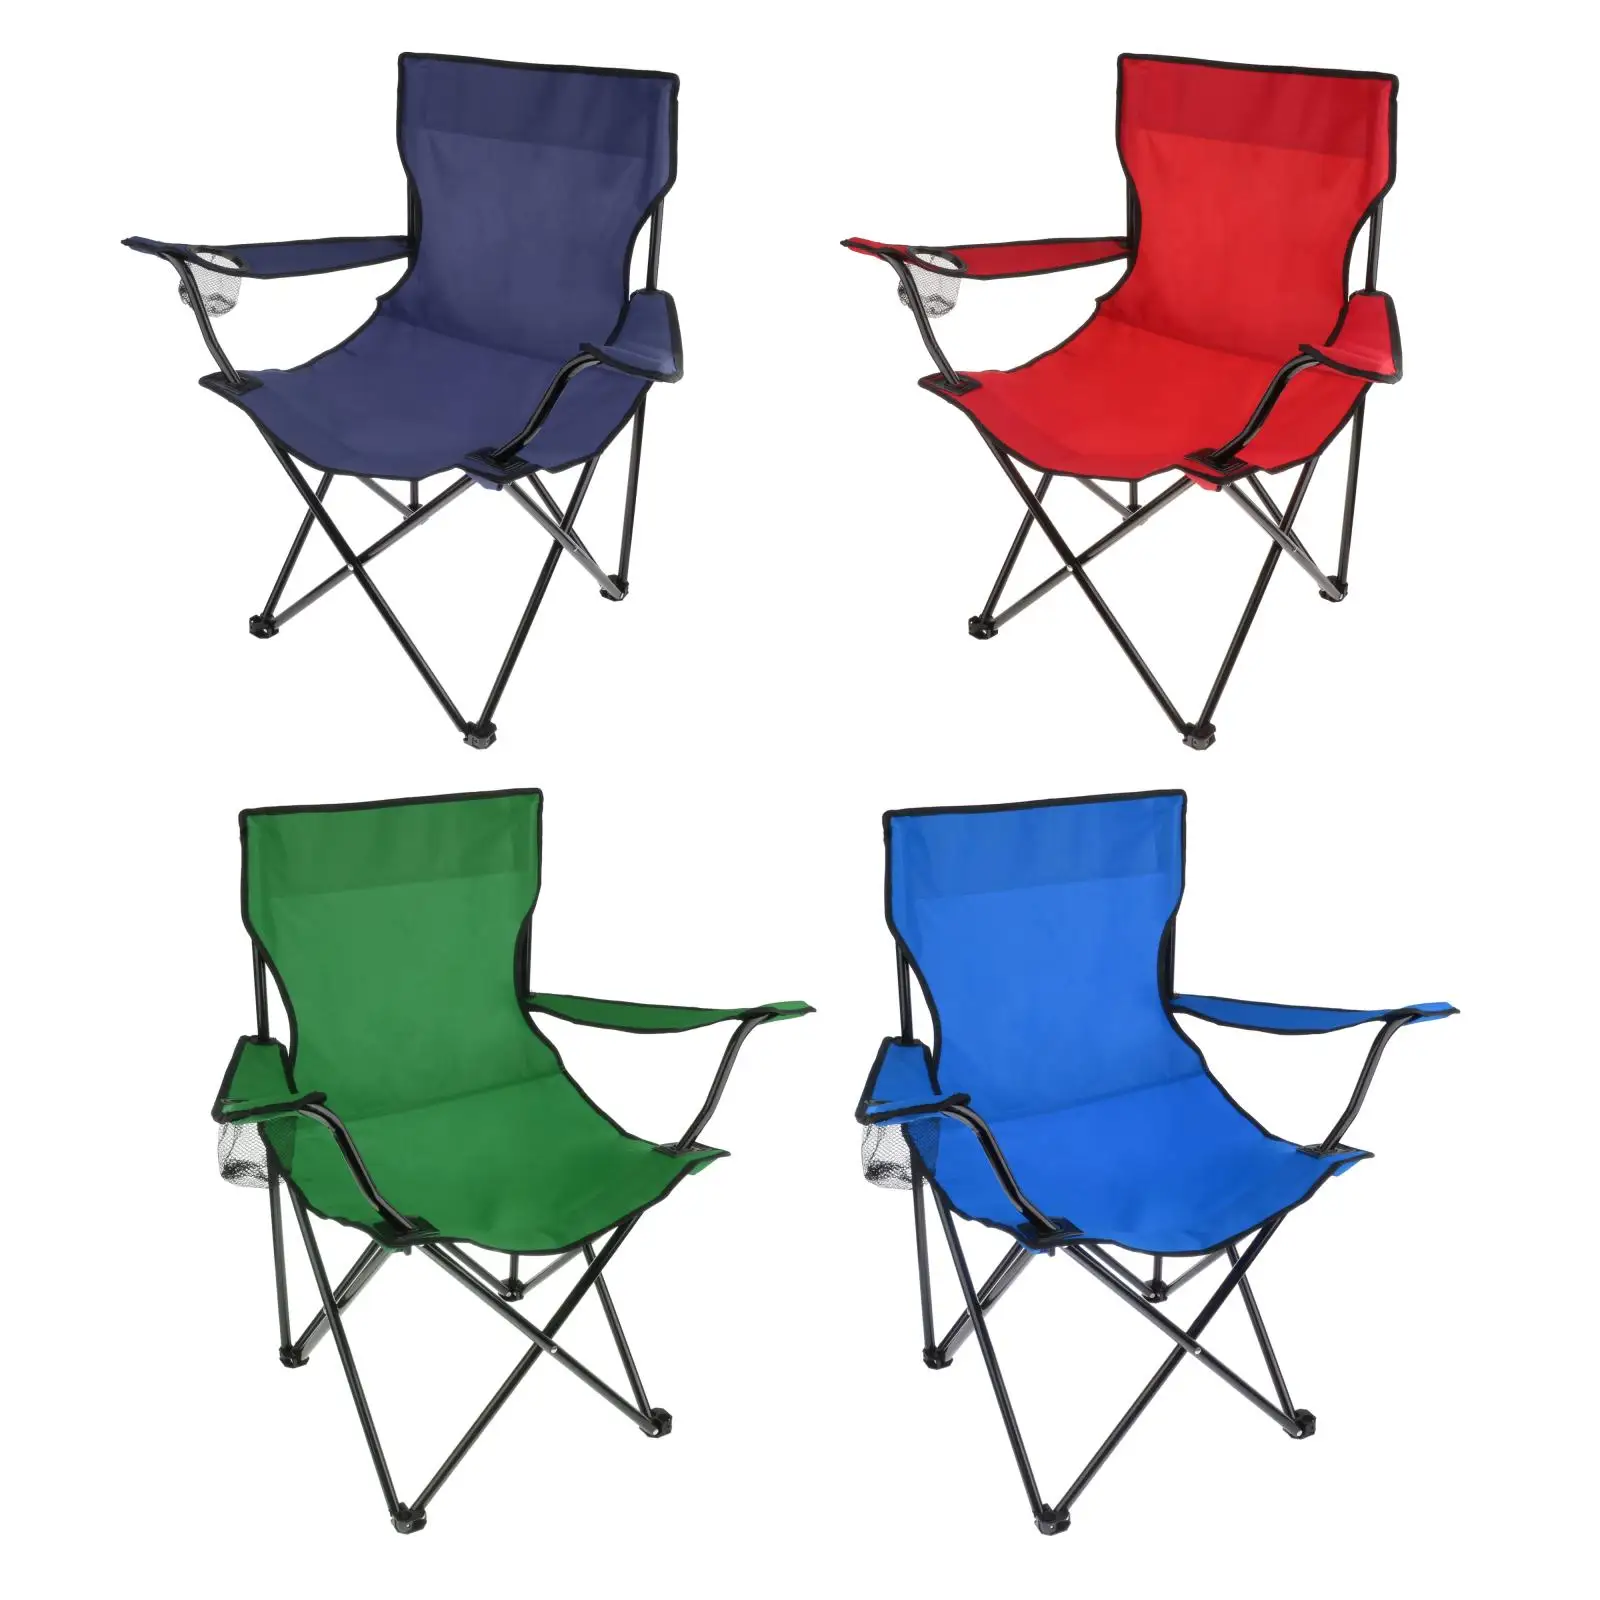 Folding Camping Chairs Folding Chairs with Cup Holder Arm Rest Outdoor Fishing Beach Garden Travel Heavy Duty Seat